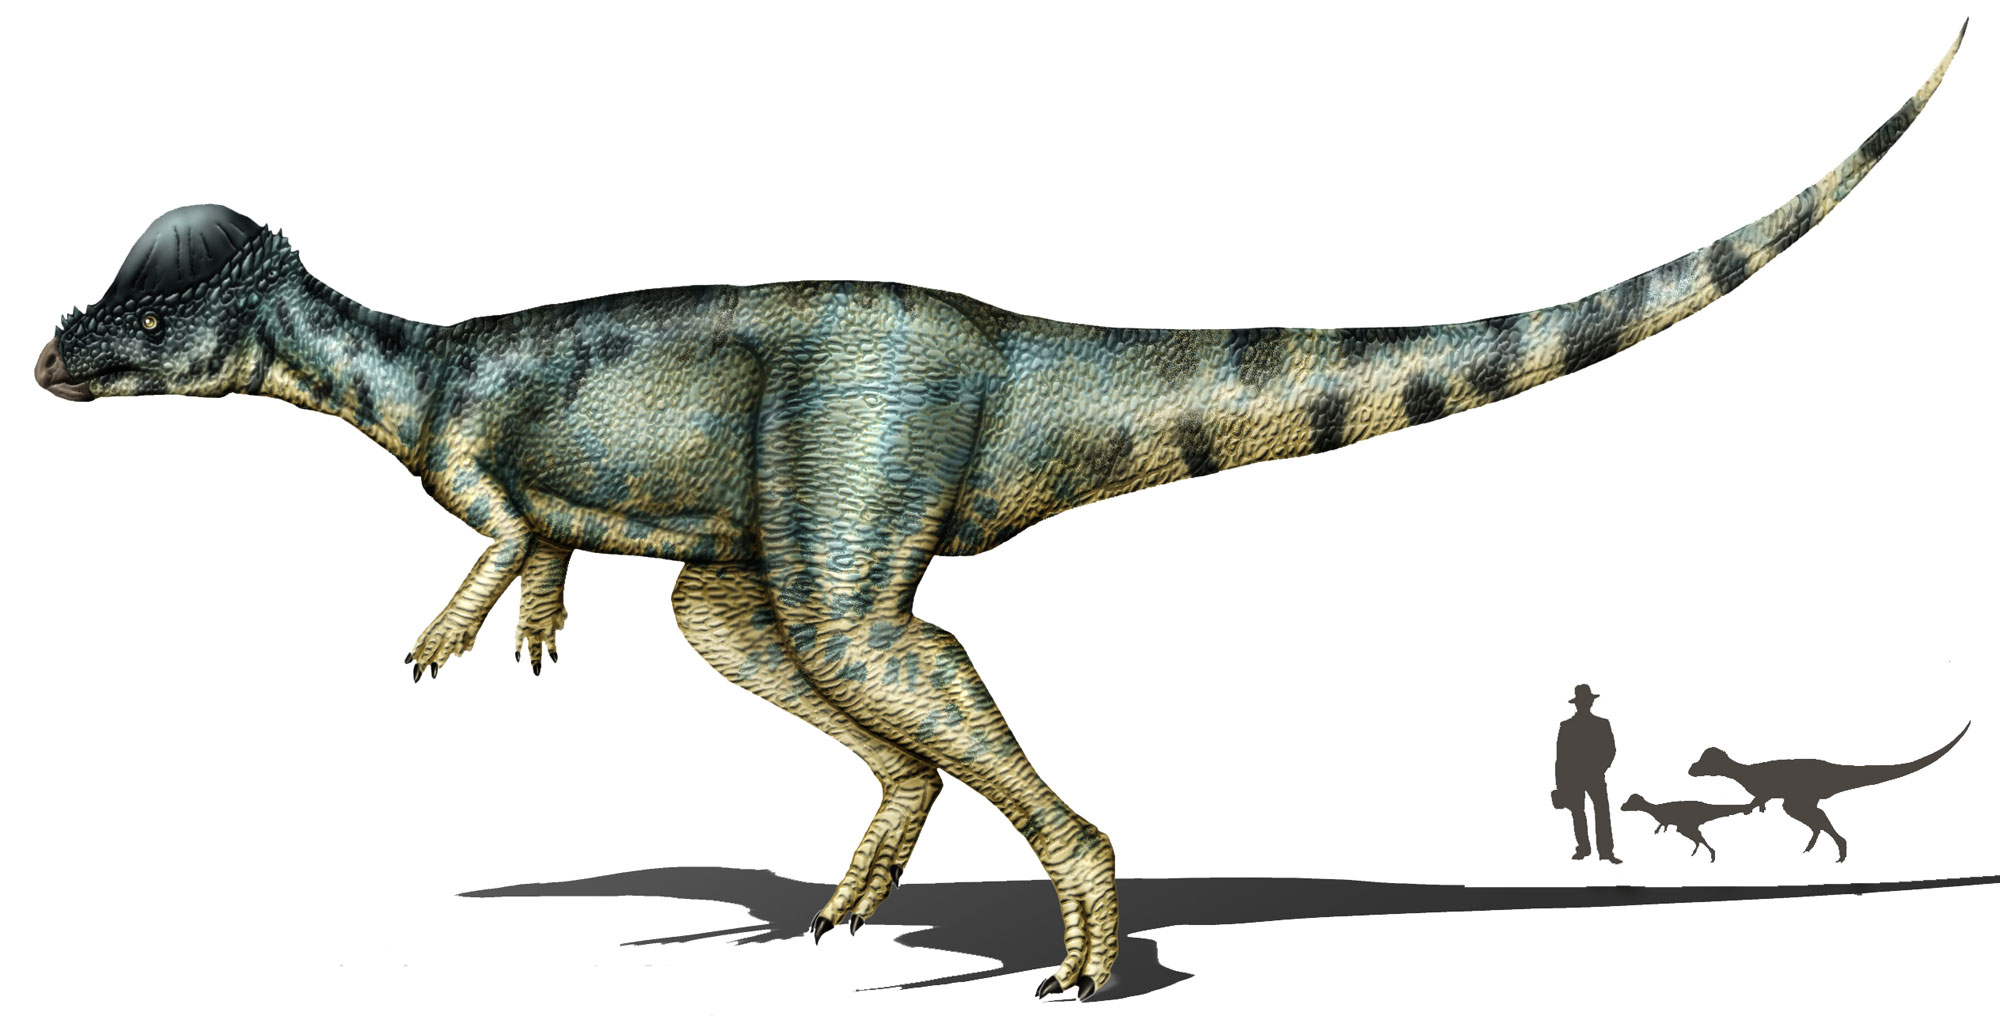 Illustration of Alaskacephale, a pacycephalosaur. The dinosaur is bipedal (runs on two legs) and has relatively short arms. The head is small with a dome-like crown. The long tail extends backwards from the body off the ground. At the bottom right is a silhouette of a man standing next to two pacycephalosaurs . The man is taller than both dinosaurs.